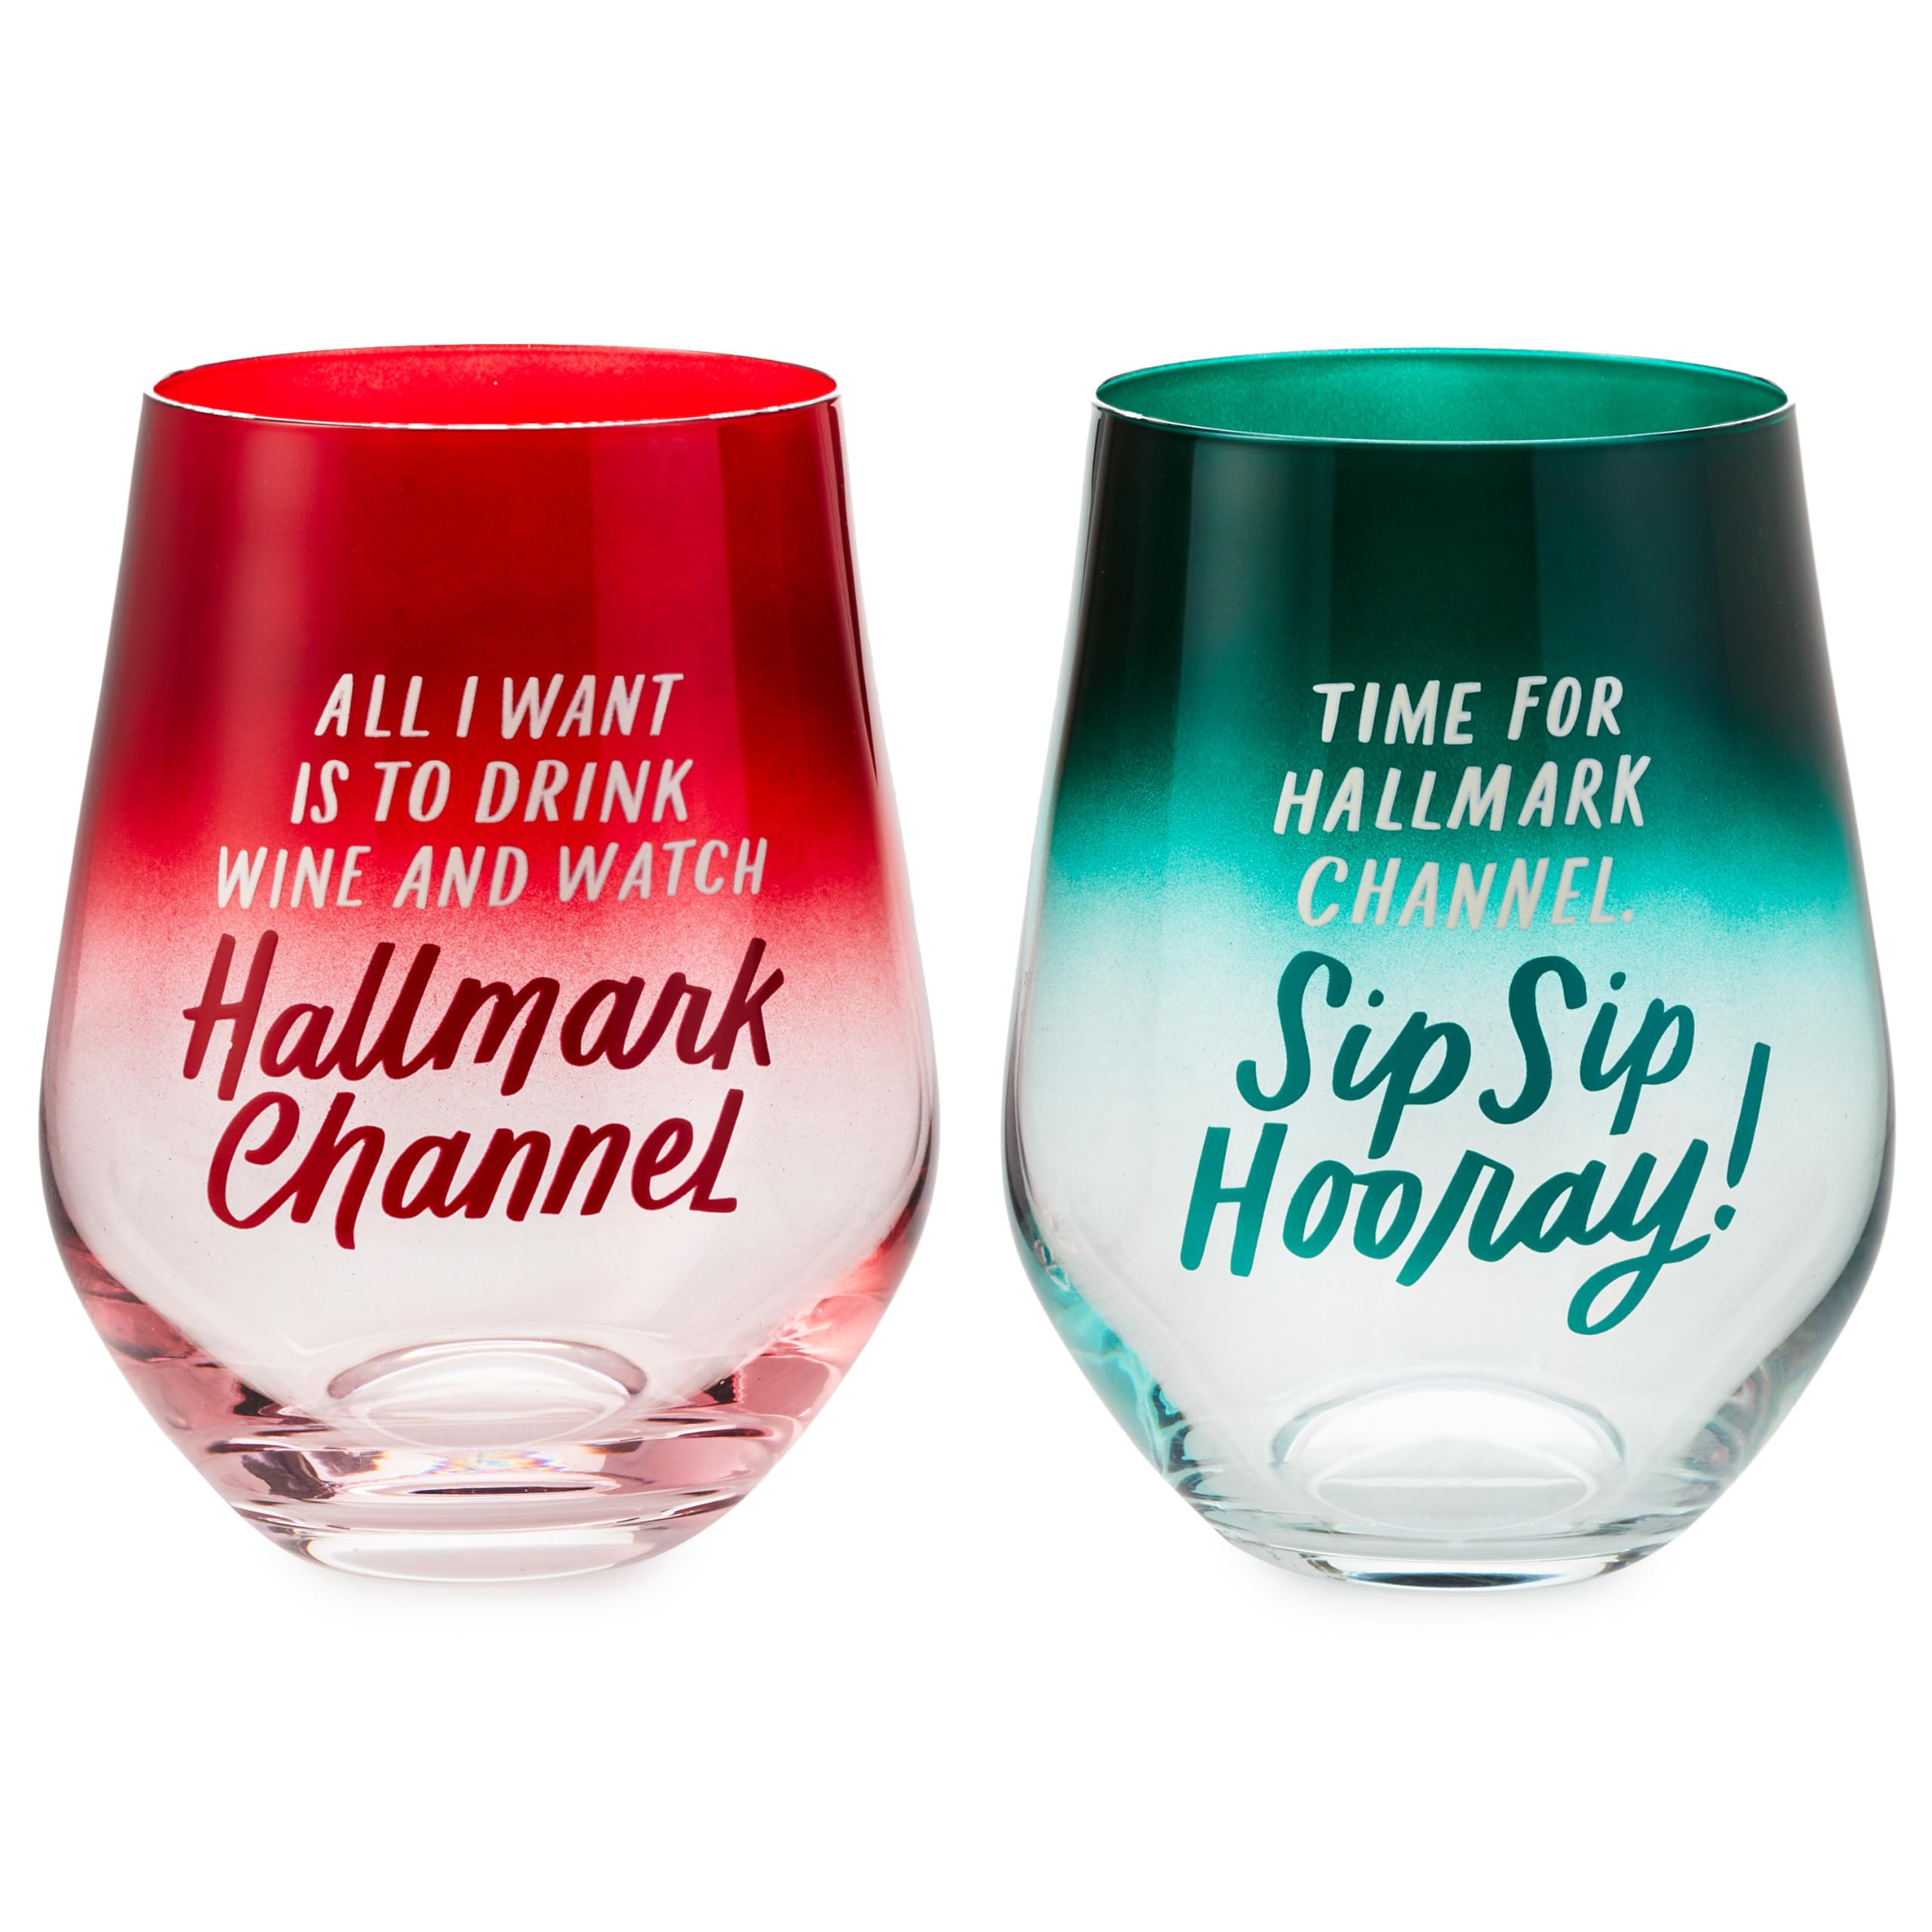 Hallmark Channel Stemless Wine Glasses (Sip Sip Hooray! Red and Green) Set of 2, 12 oz. Each, Christmas Gifts